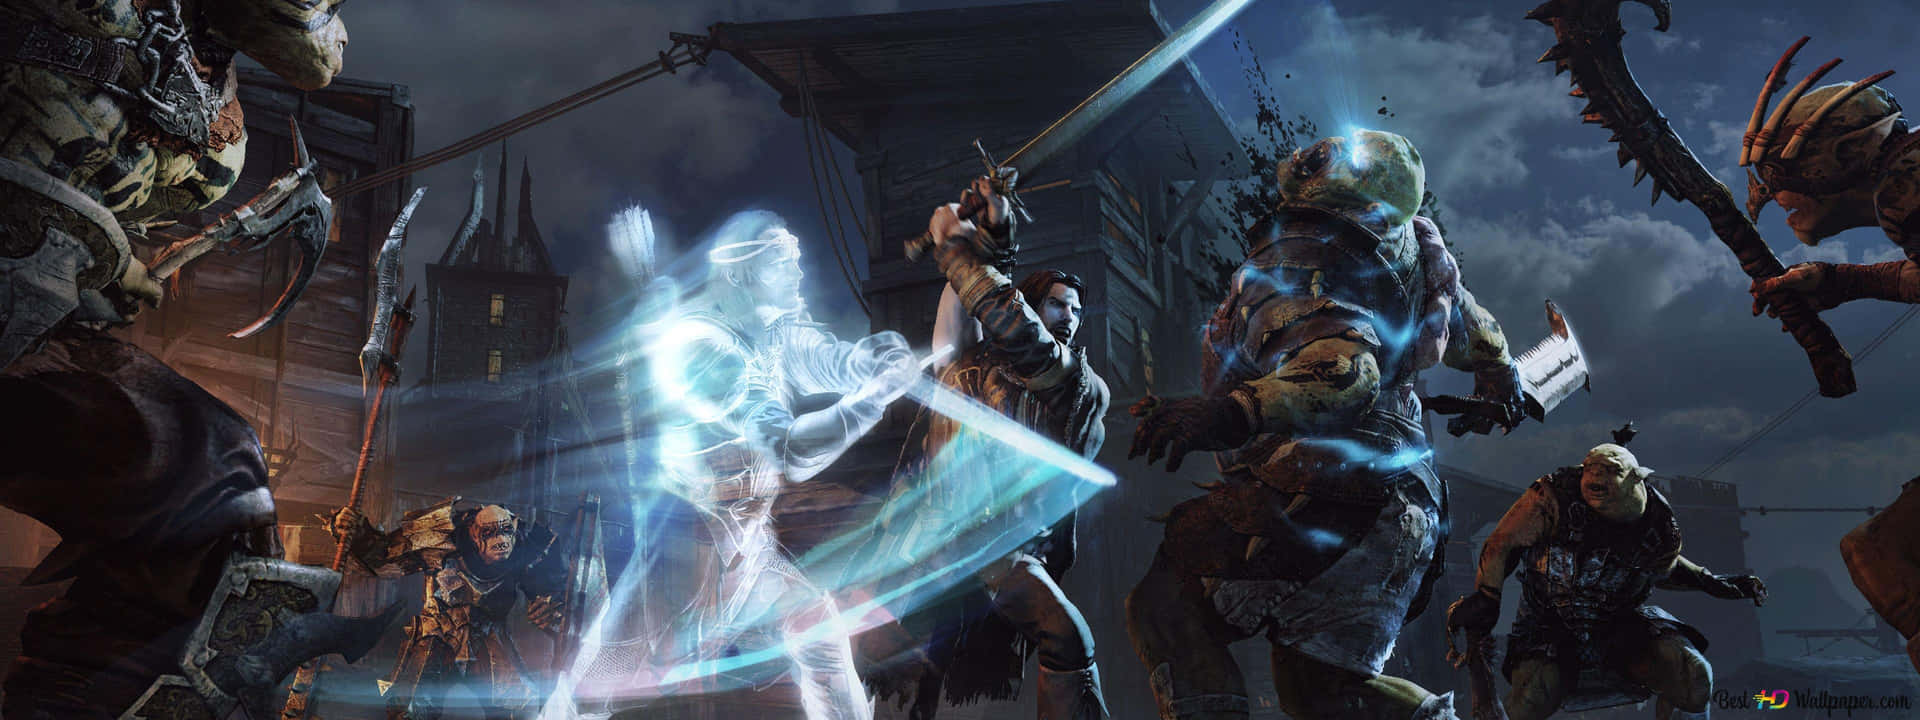 Brandish Your Sword and Take Revenge in Shadow Of Mordor